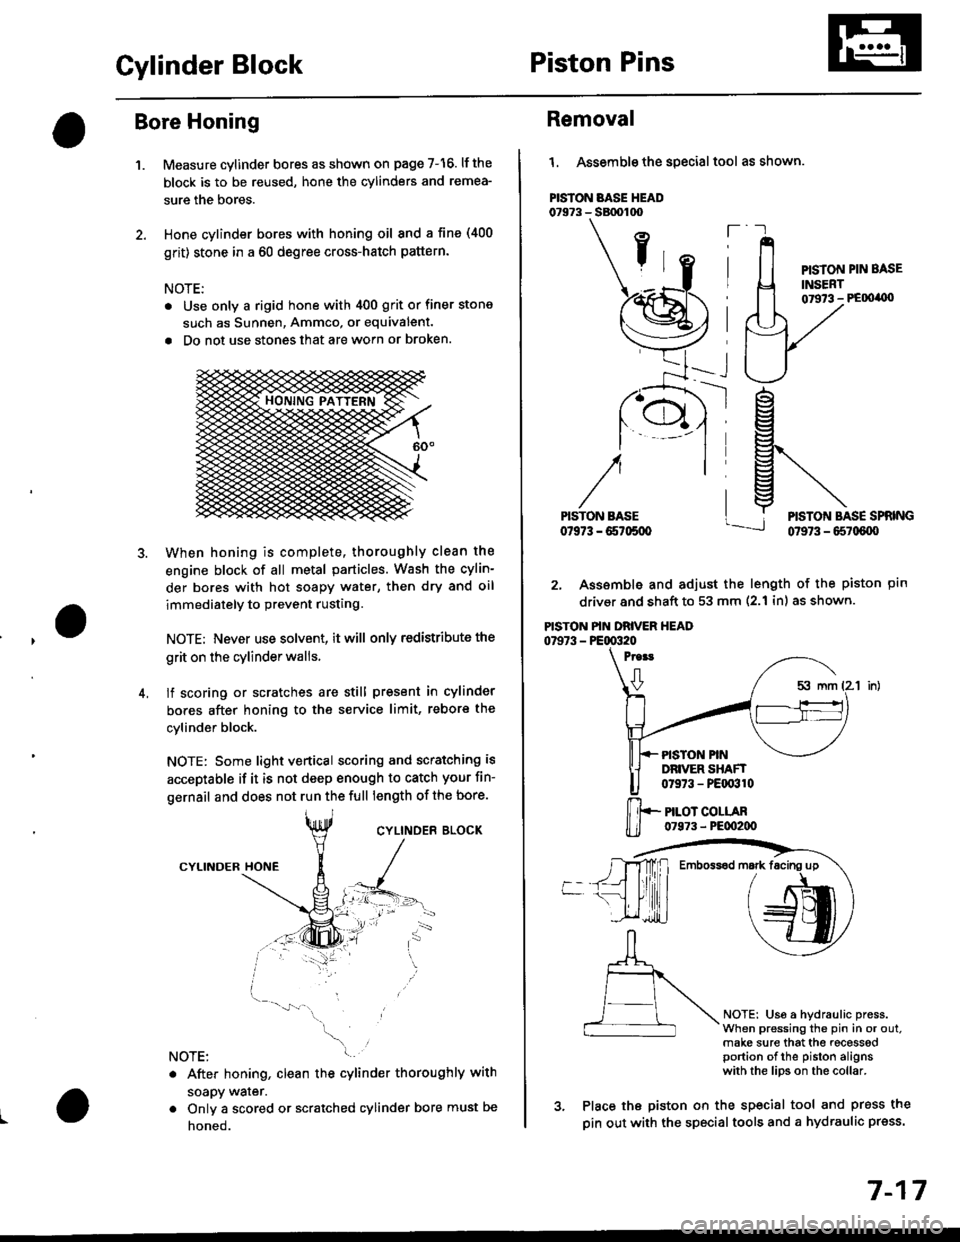 HONDA CIVIC 2000 6.G Repair Manual Cylinder BlockPiston Pins
Bore Honing
1.Measure cylinder bores as shown on page 7-16. lf the
block is to be reused, hone the cylinders and remea-
sure the bores.
Hone cylinder bores with honing oil 8n